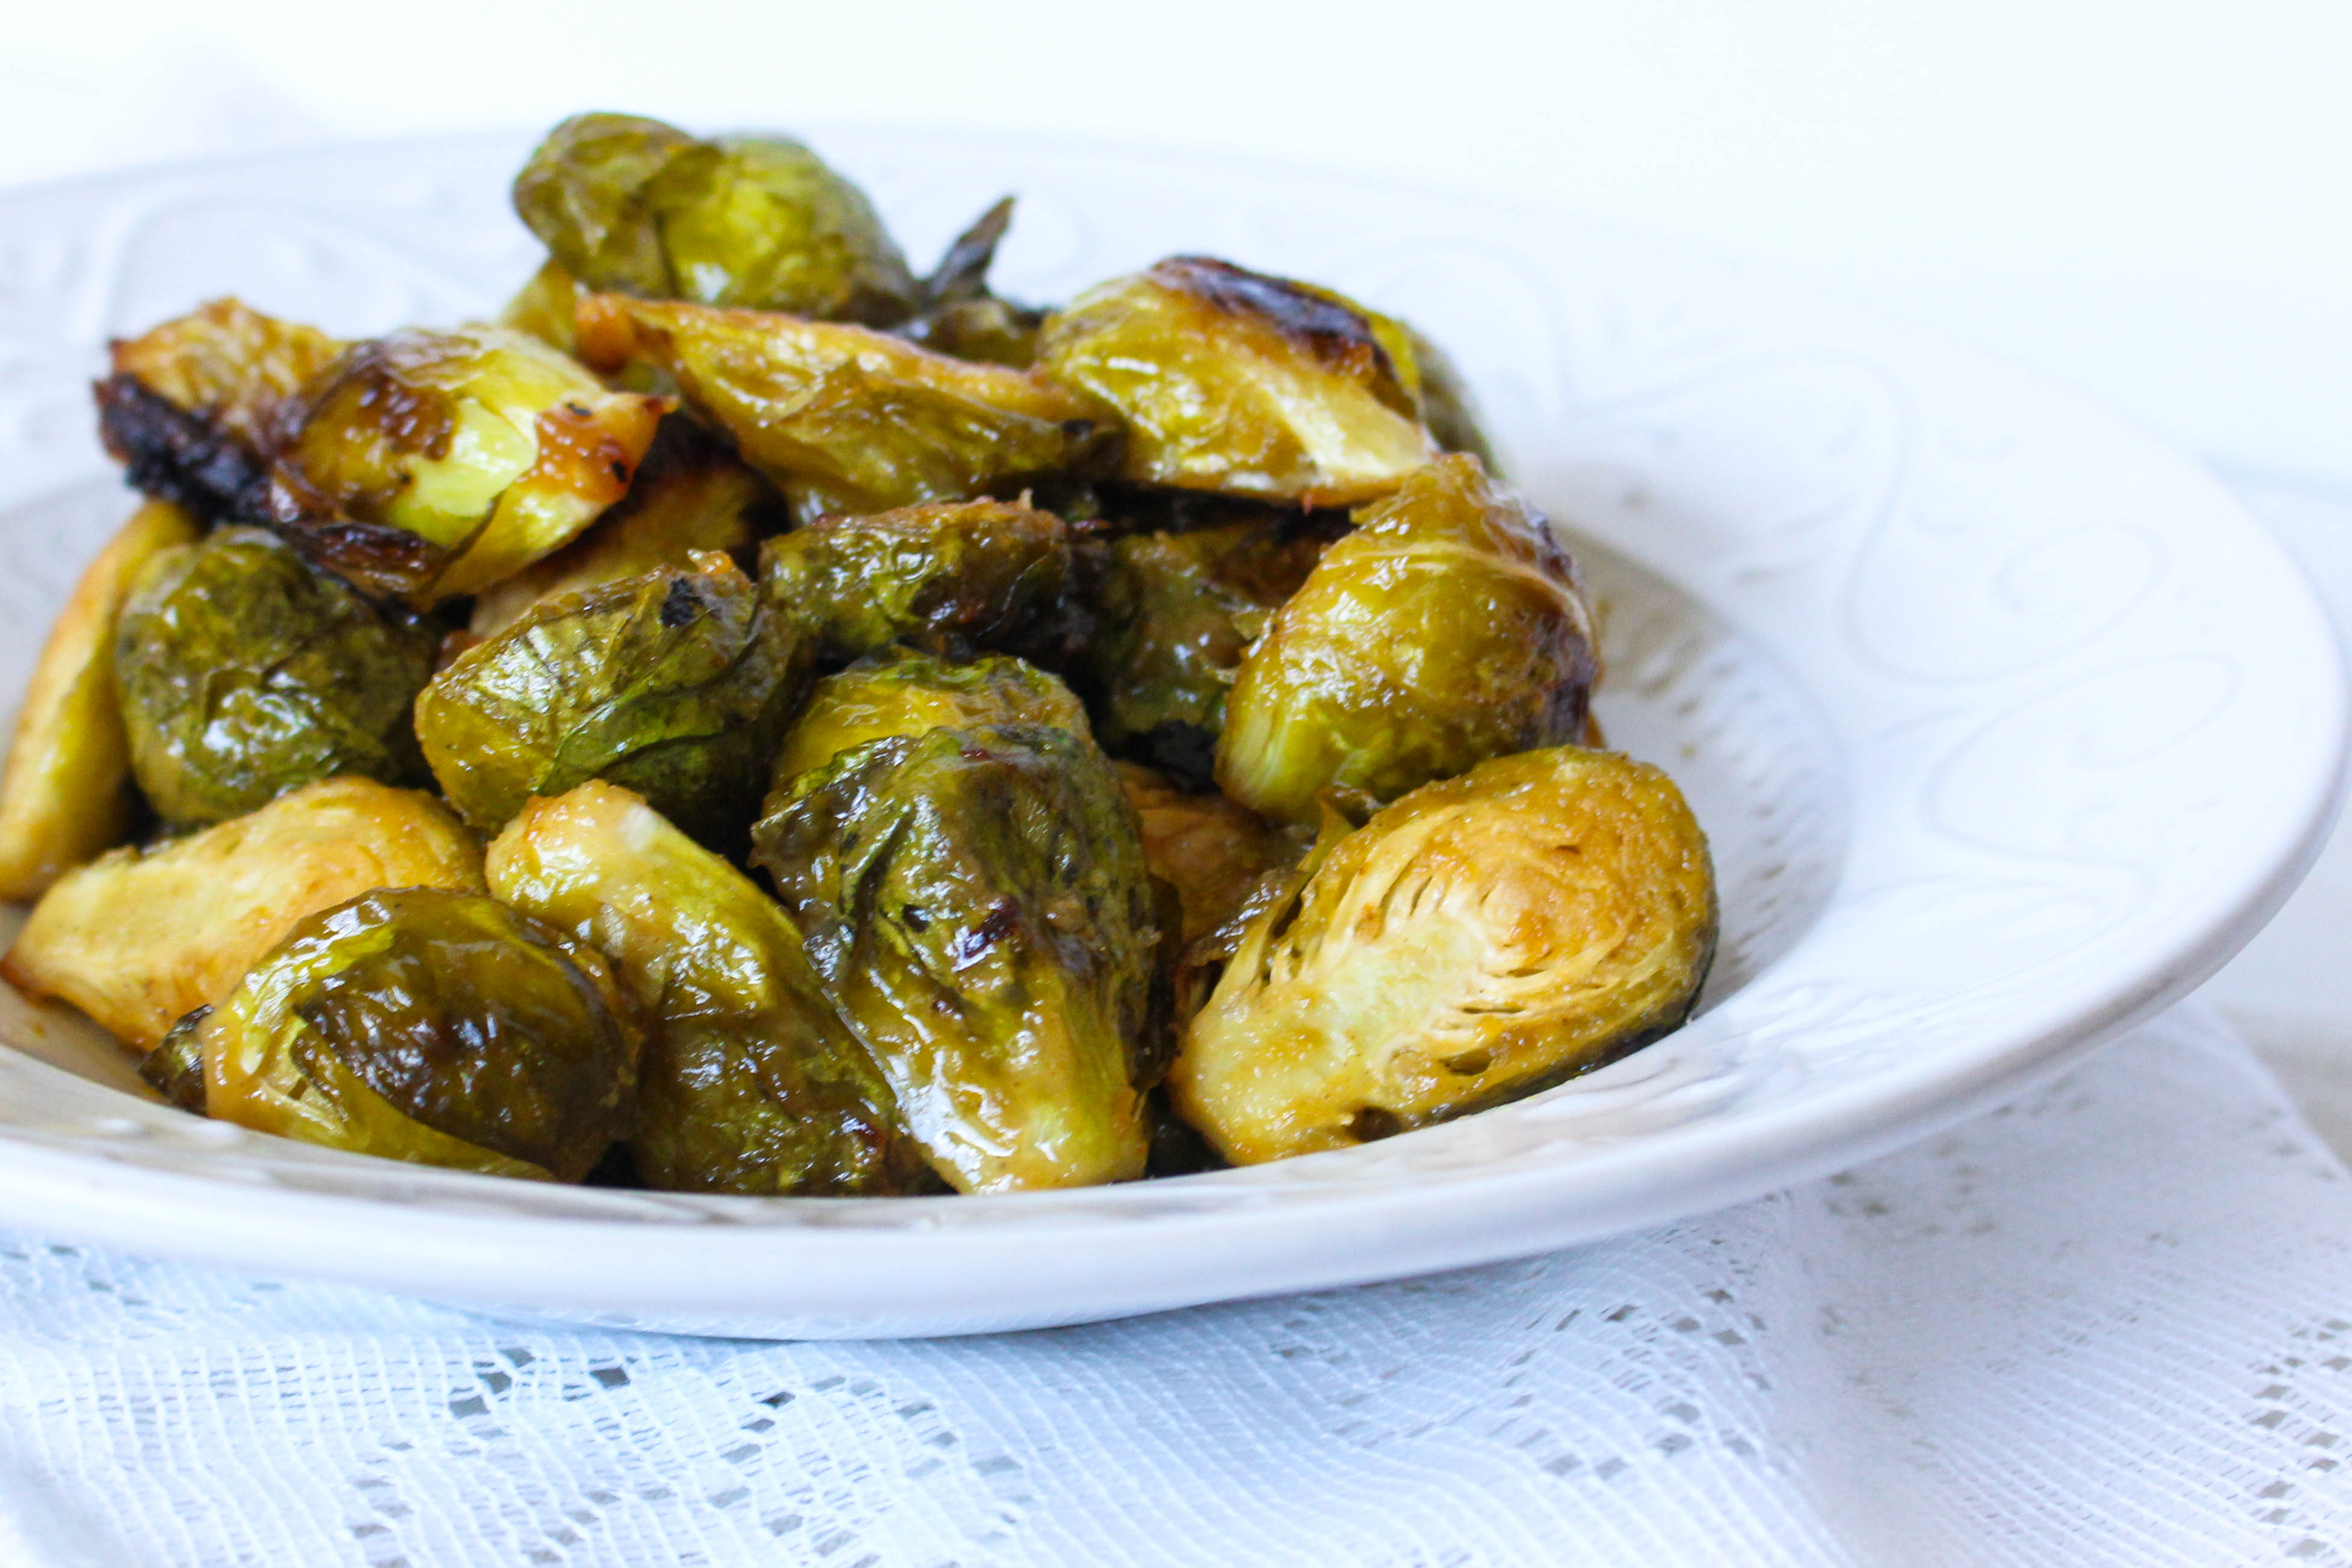 Roasted Maple-Mustard Glazed Brussels Sprouts via RDelicious Kitchen via RDelicious Kitchen @rd_kitchen #brusselssprouts #thanksgiving #sidedishes # lowcarb #maple #mustard 